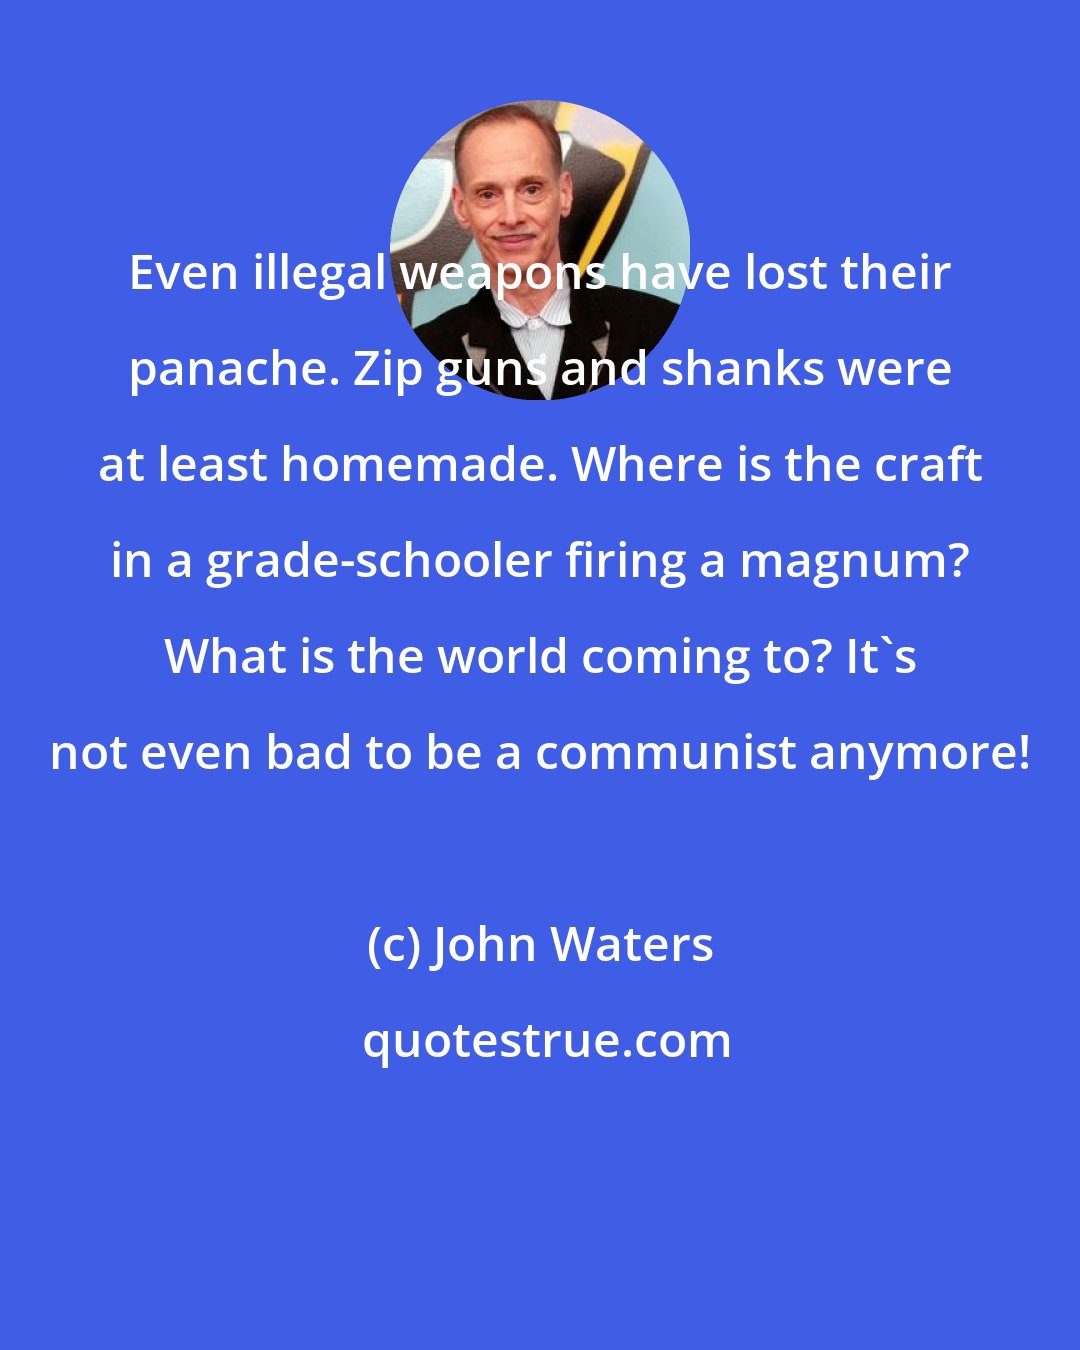 John Waters: Even illegal weapons have lost their panache. Zip guns and shanks were at least homemade. Where is the craft in a grade-schooler firing a magnum? What is the world coming to? It's not even bad to be a communist anymore!